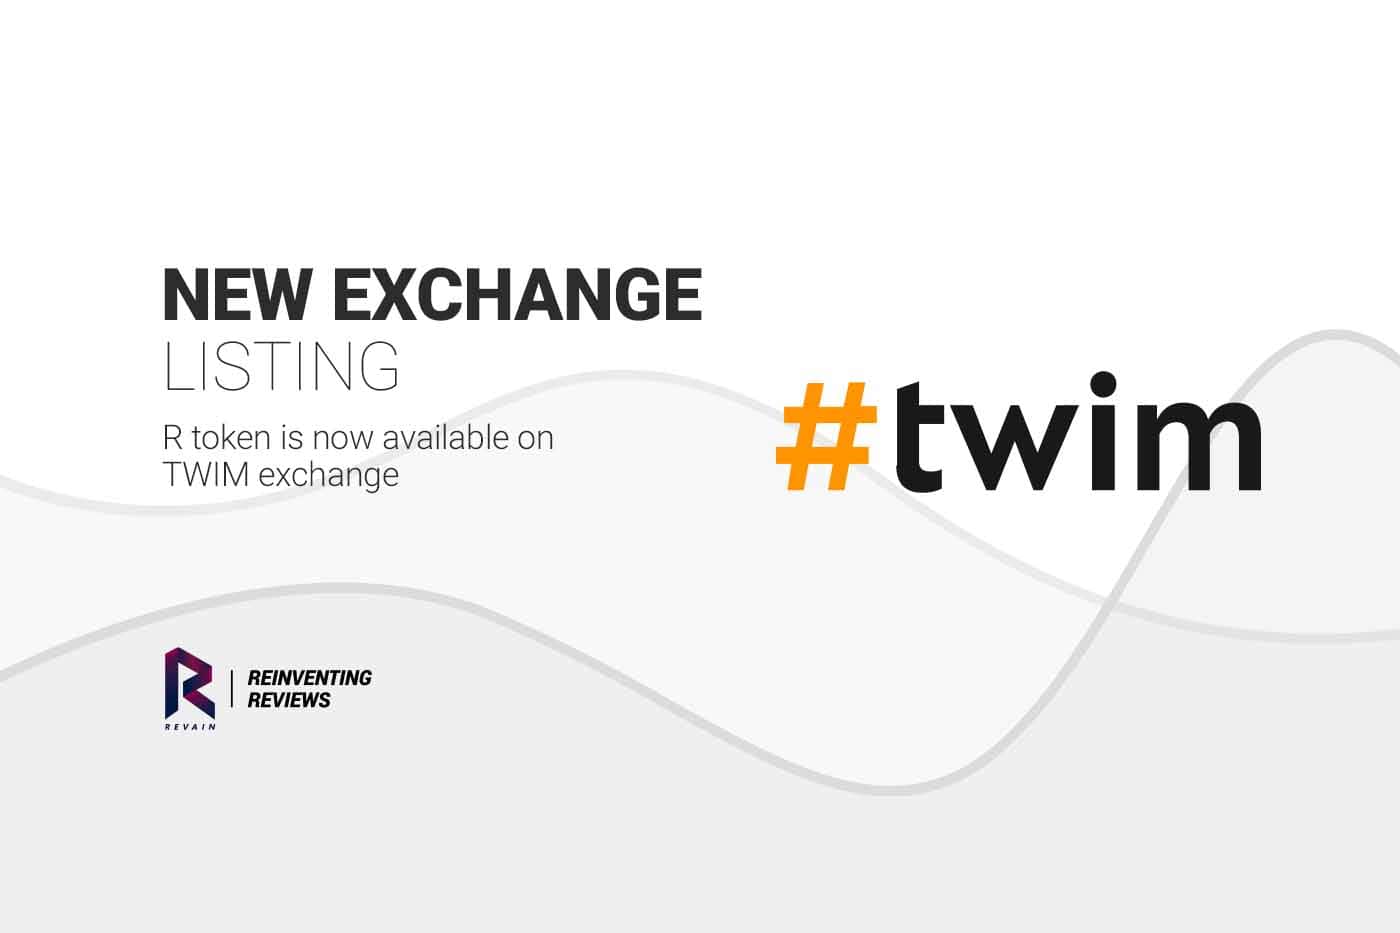 Revain is listed on Twim, the new promising exchange from Estonia 